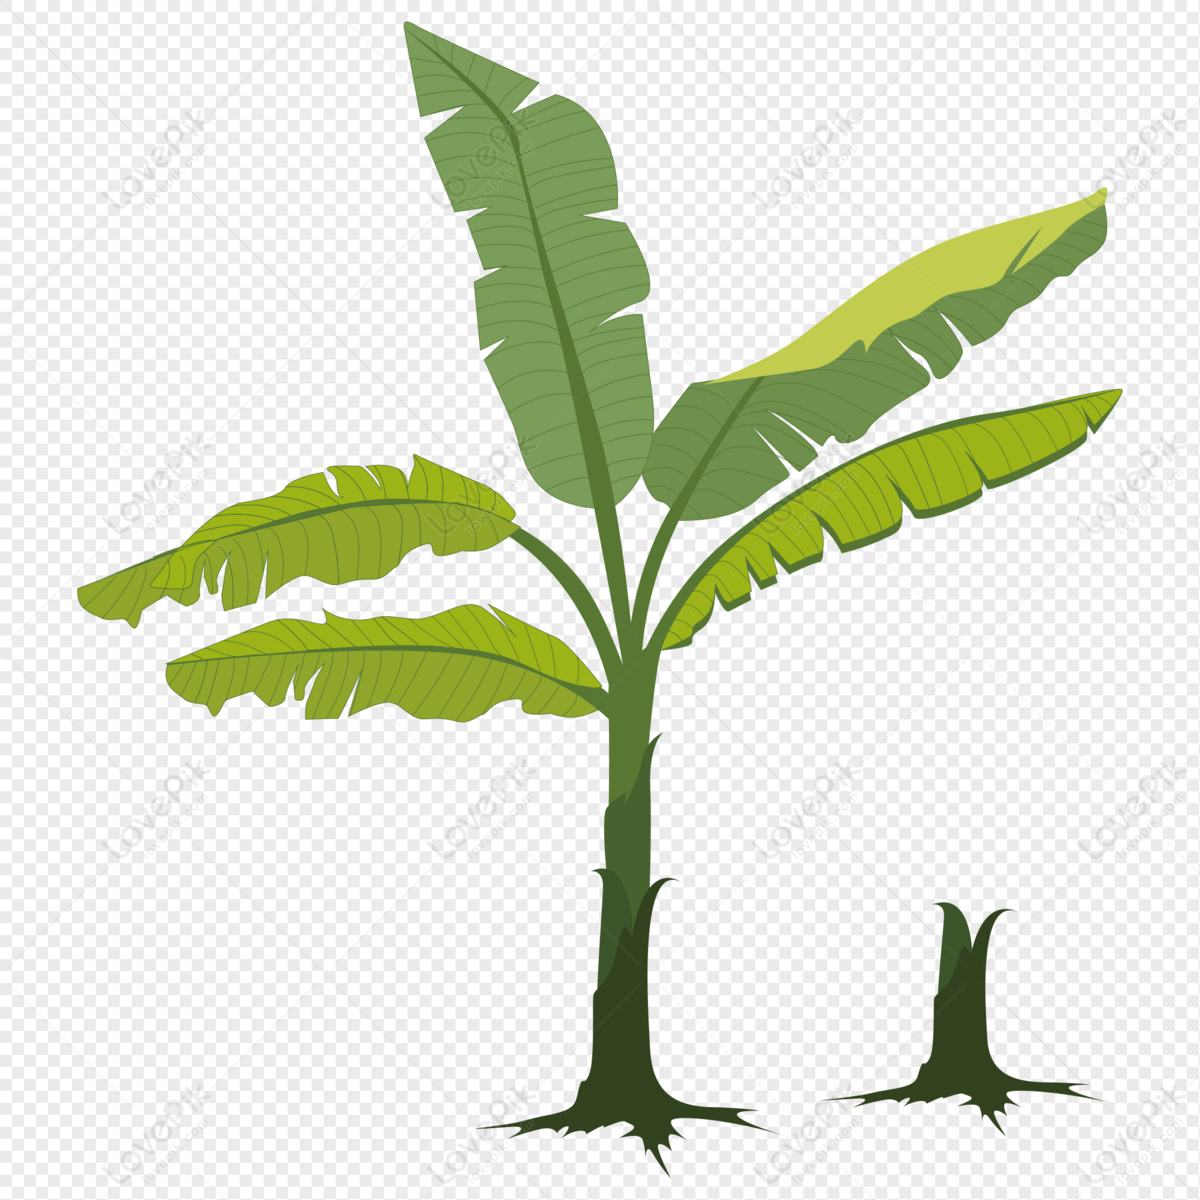 Banana Tree Images, HD Pictures For Free Vectors Download - Lovepik.com